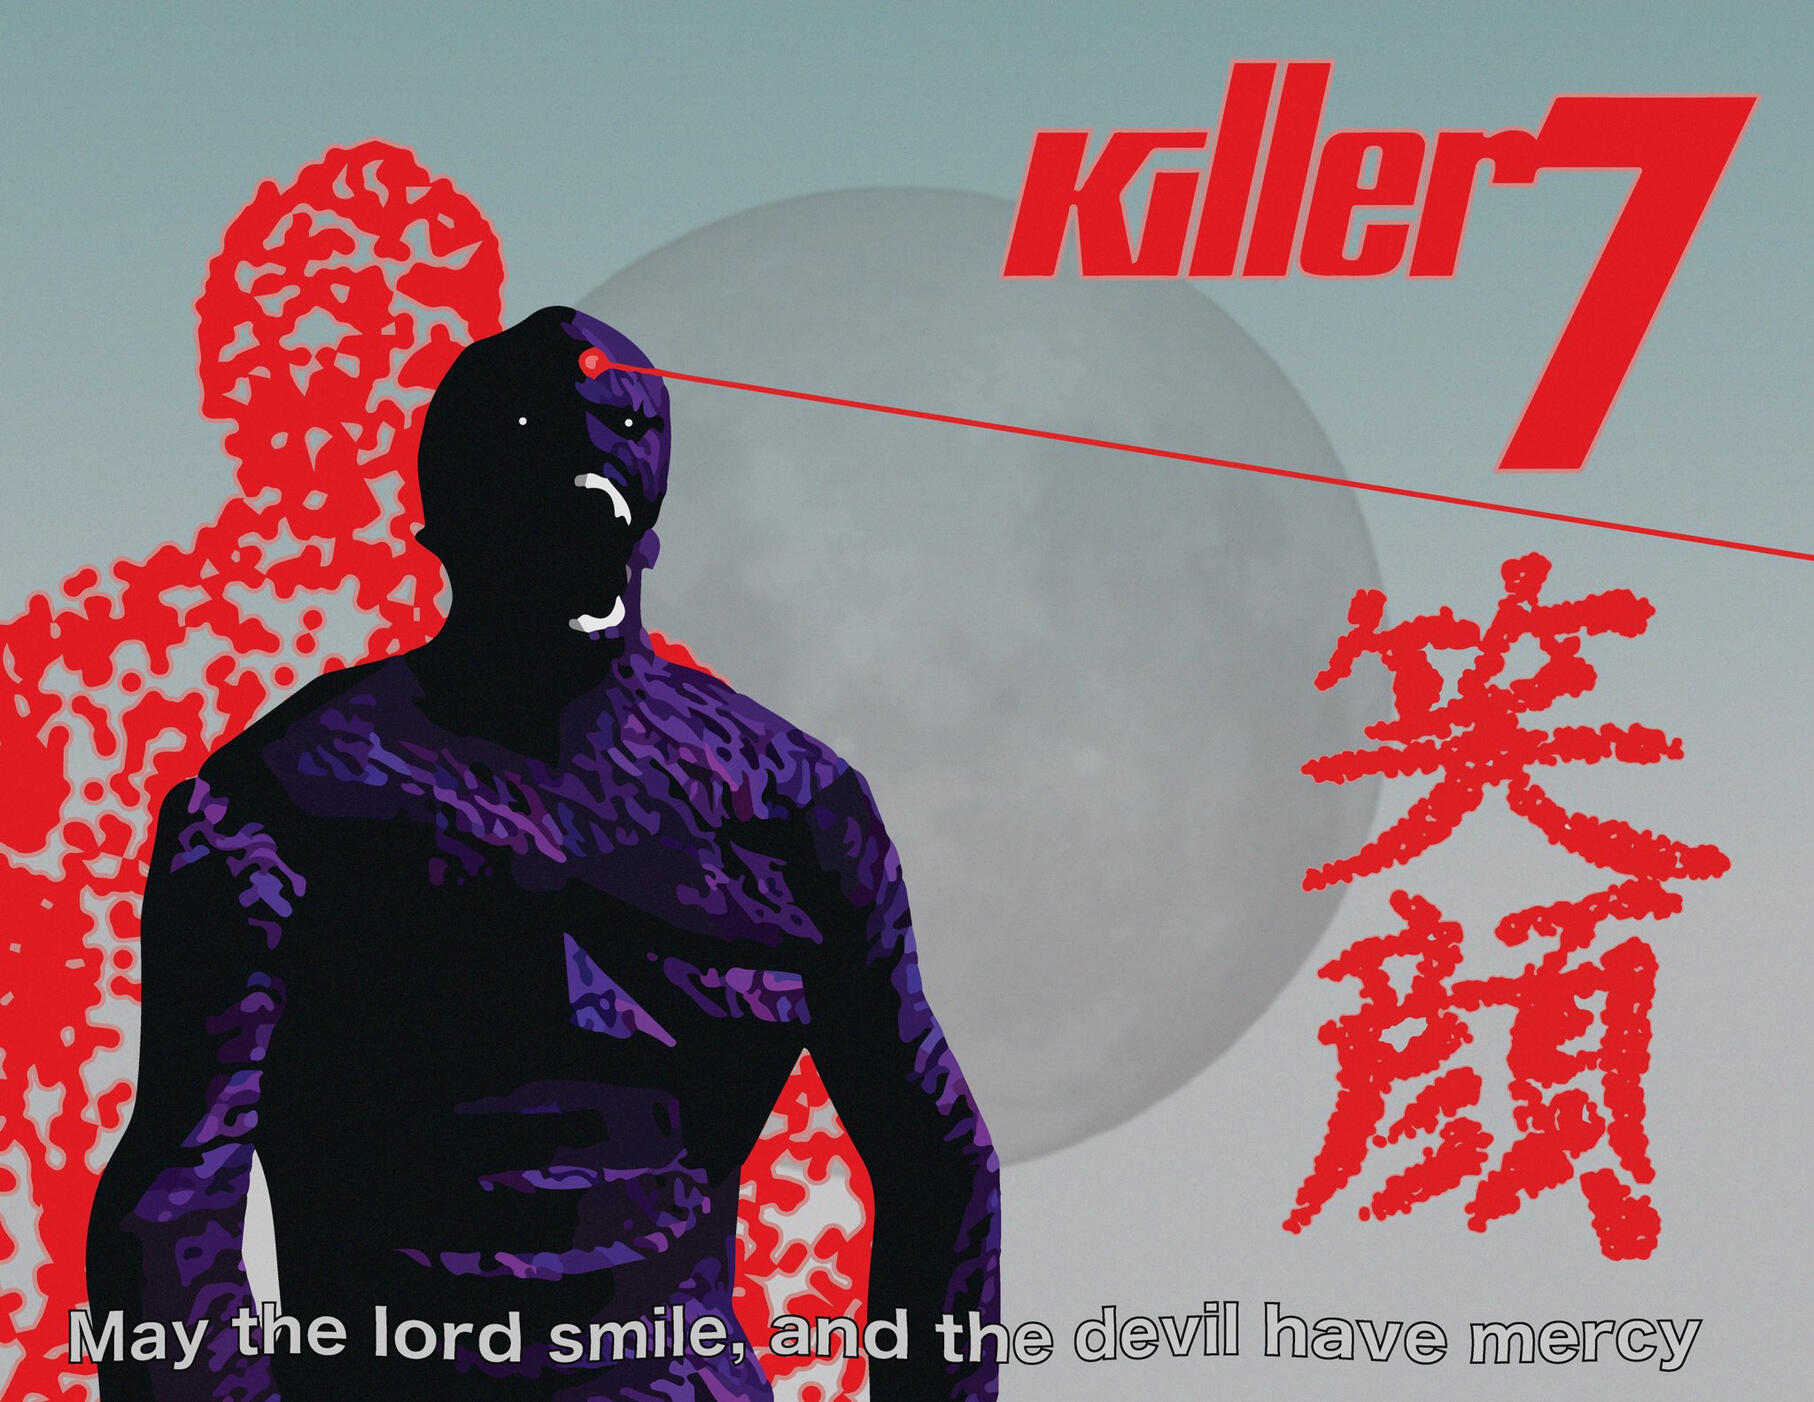 A poster arrangement for the 2005 video game, 'Killer7'.